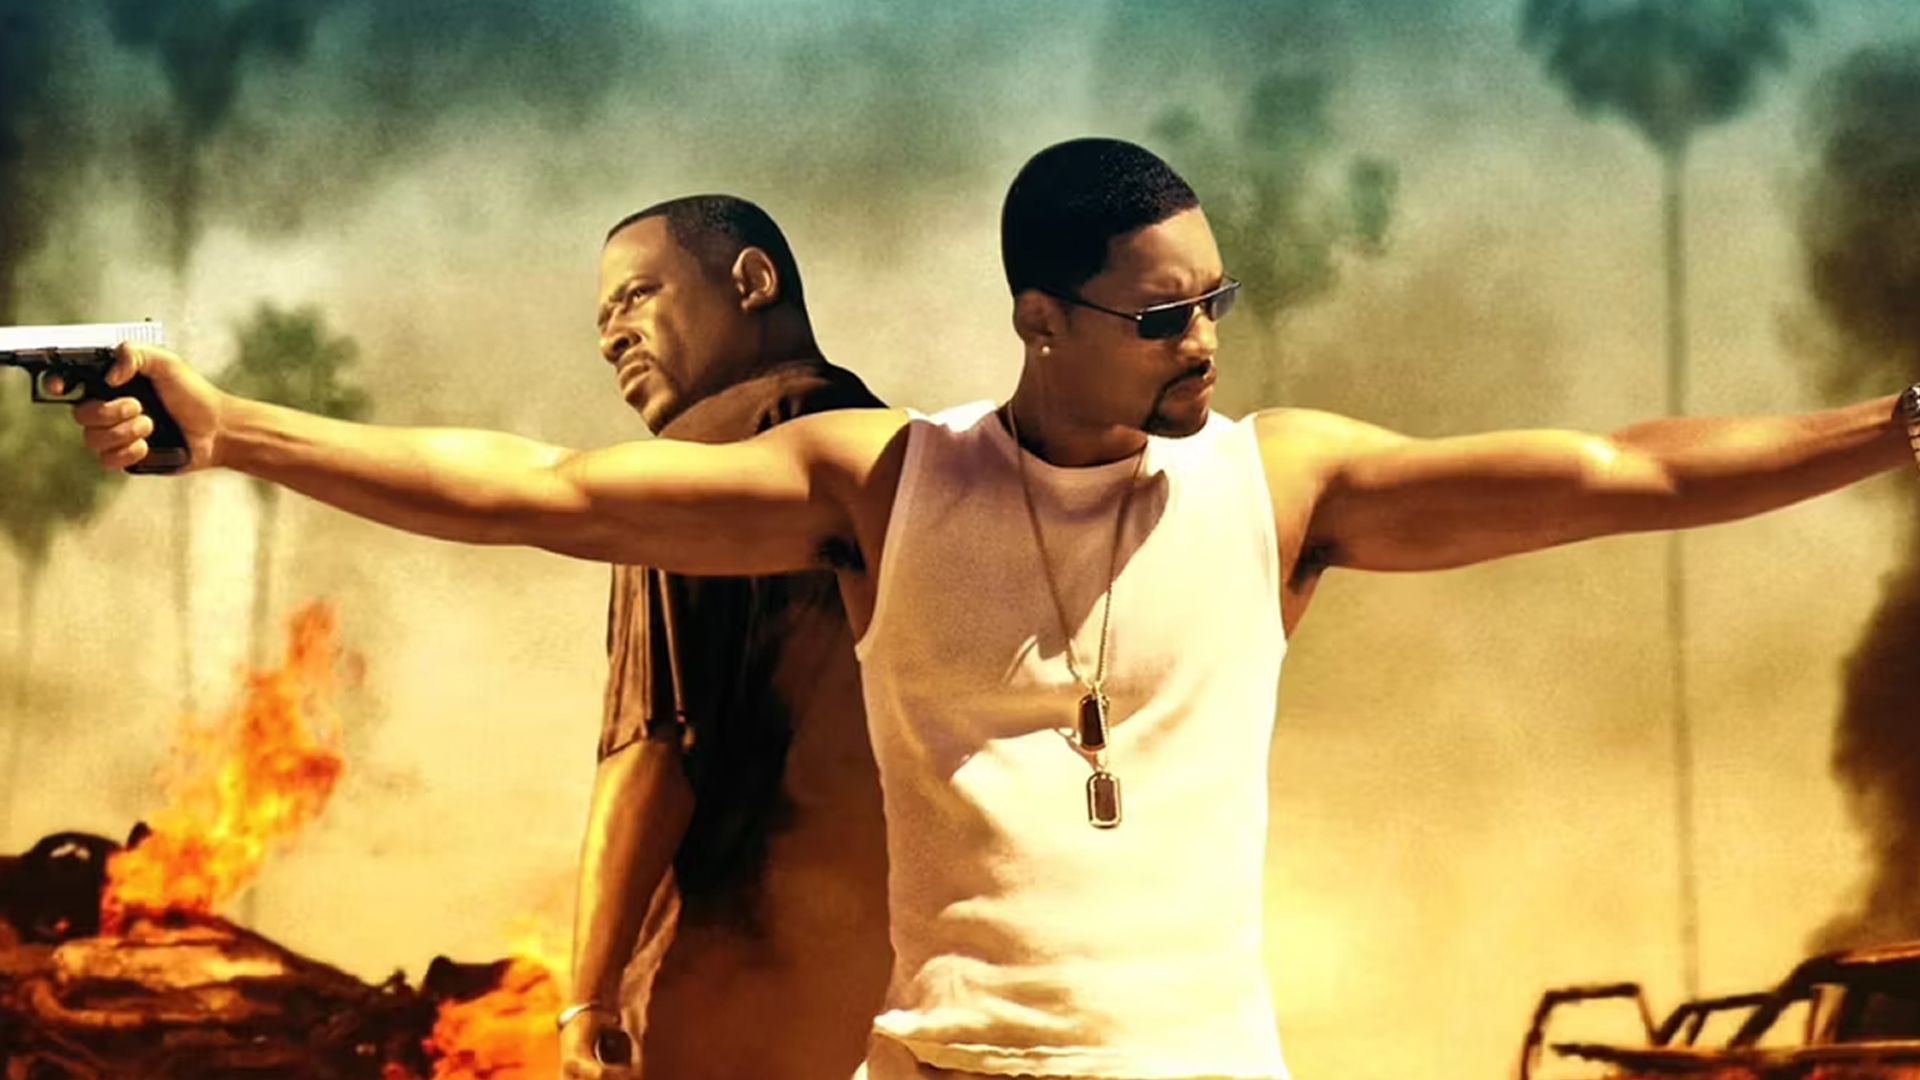 Will Smith Reveals First Look at Bad Boys 4 as Filming Wraps EMAKI